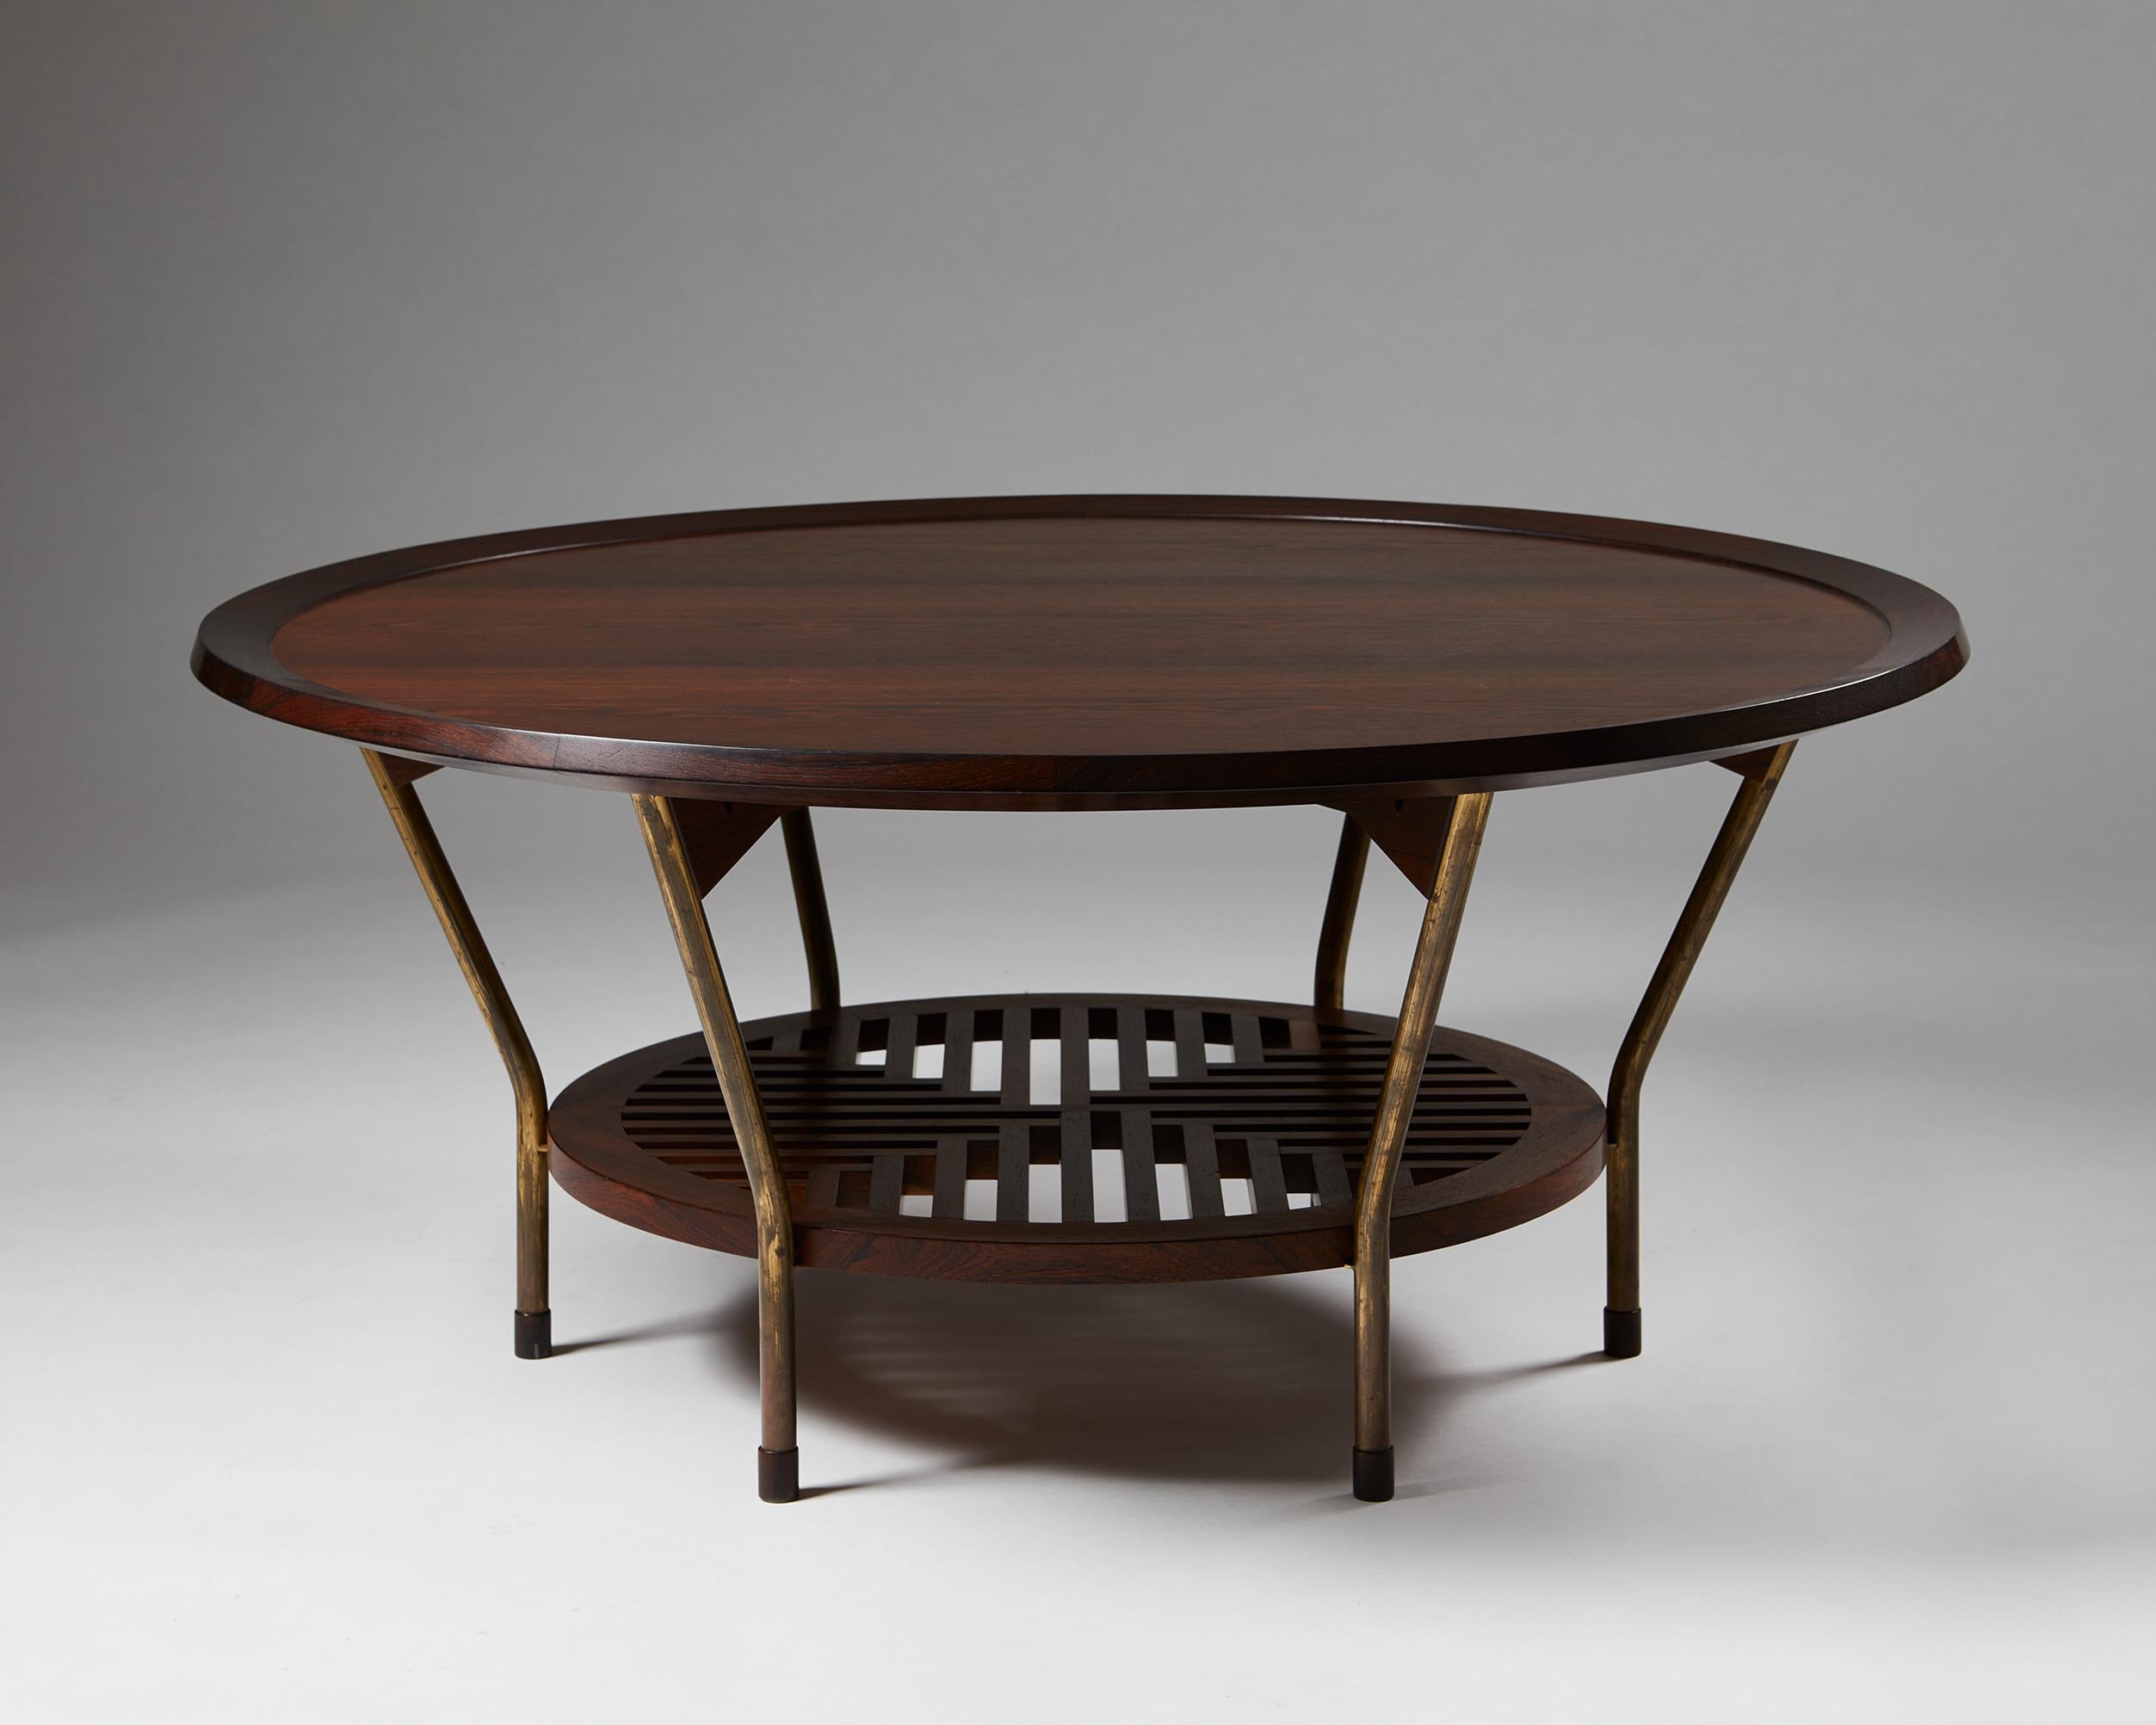 Occasional table designed by Frits Schlegel,
Denmark, 1949.

Rosewood and brass.

Unique.

Dimensions:
H: 52 cm / 1’ 8 1/2